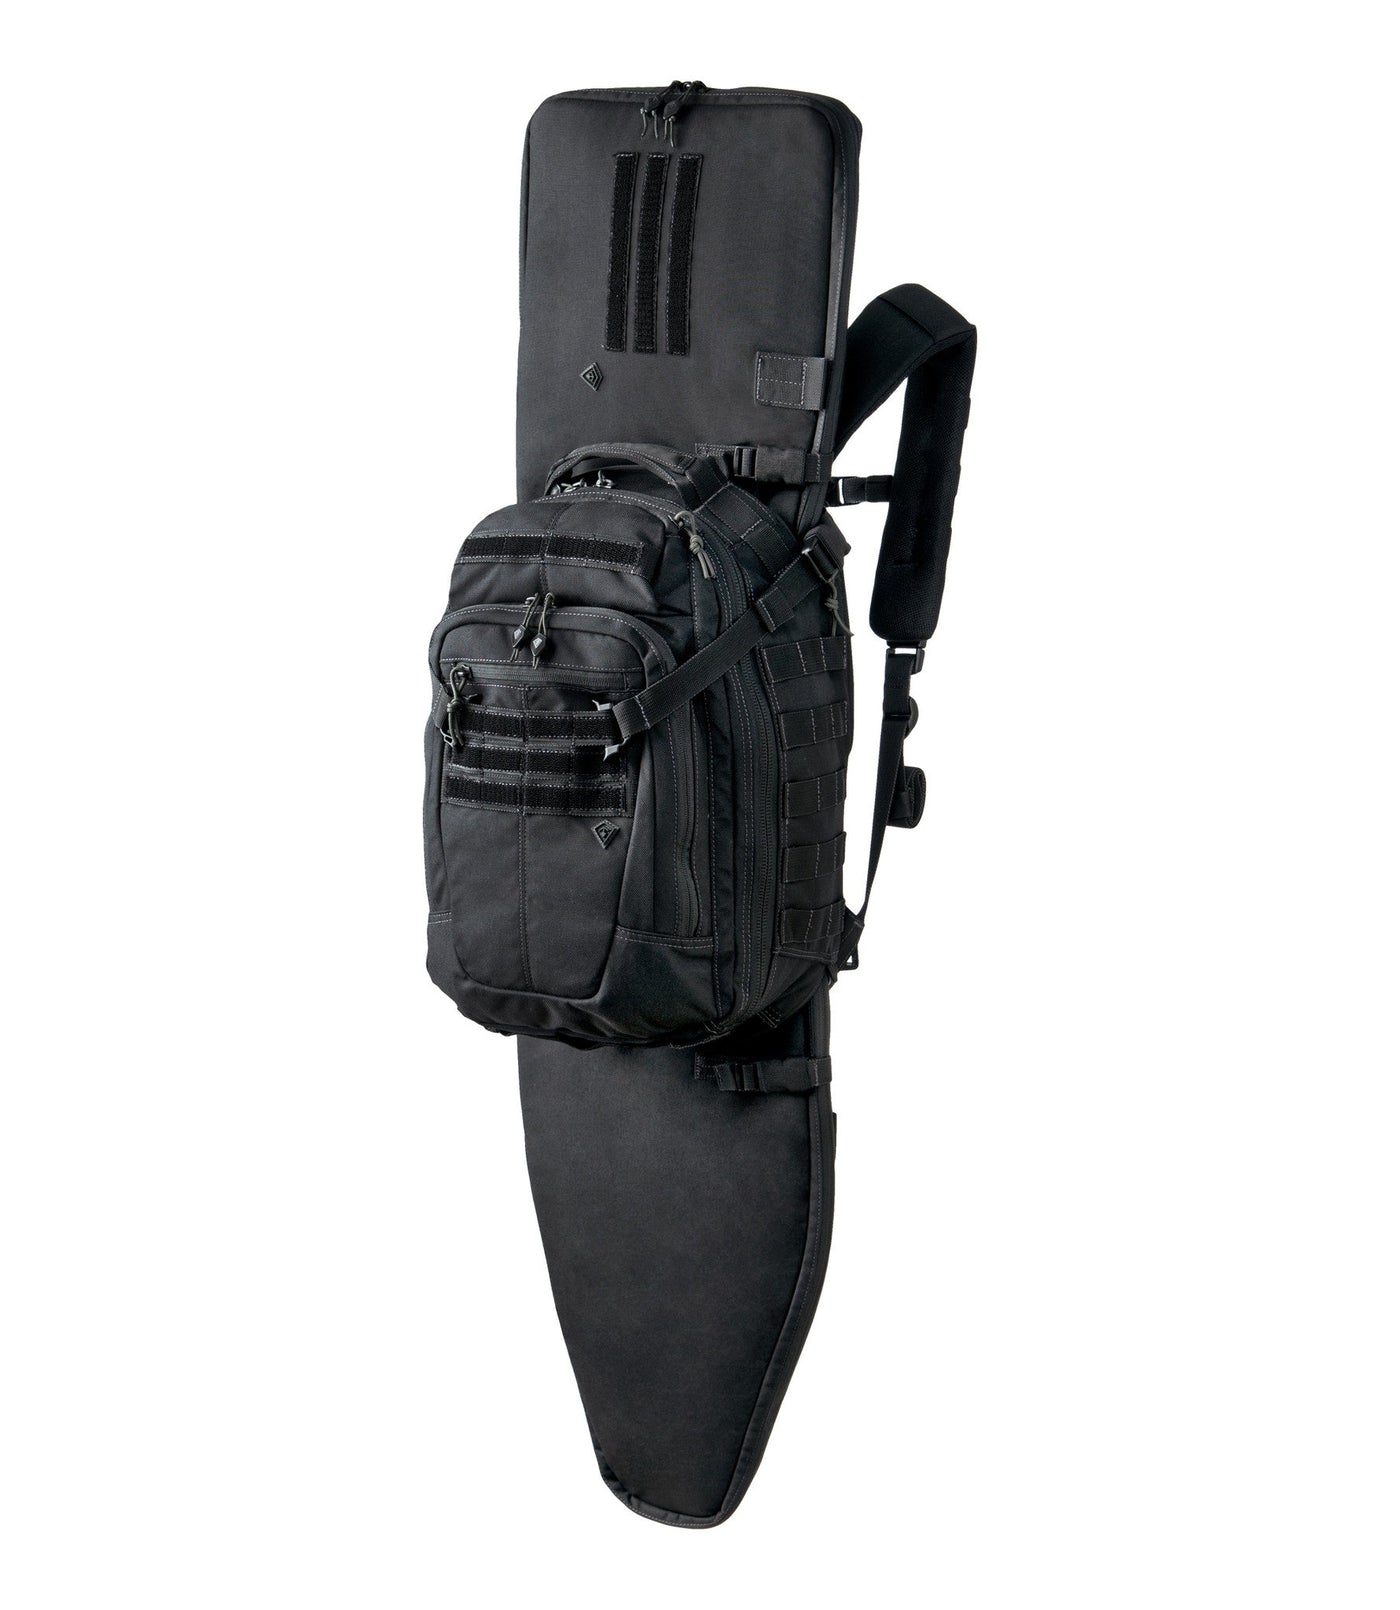 Specialist Half-Day Backpack 25L in Black with Rifle Sleeve